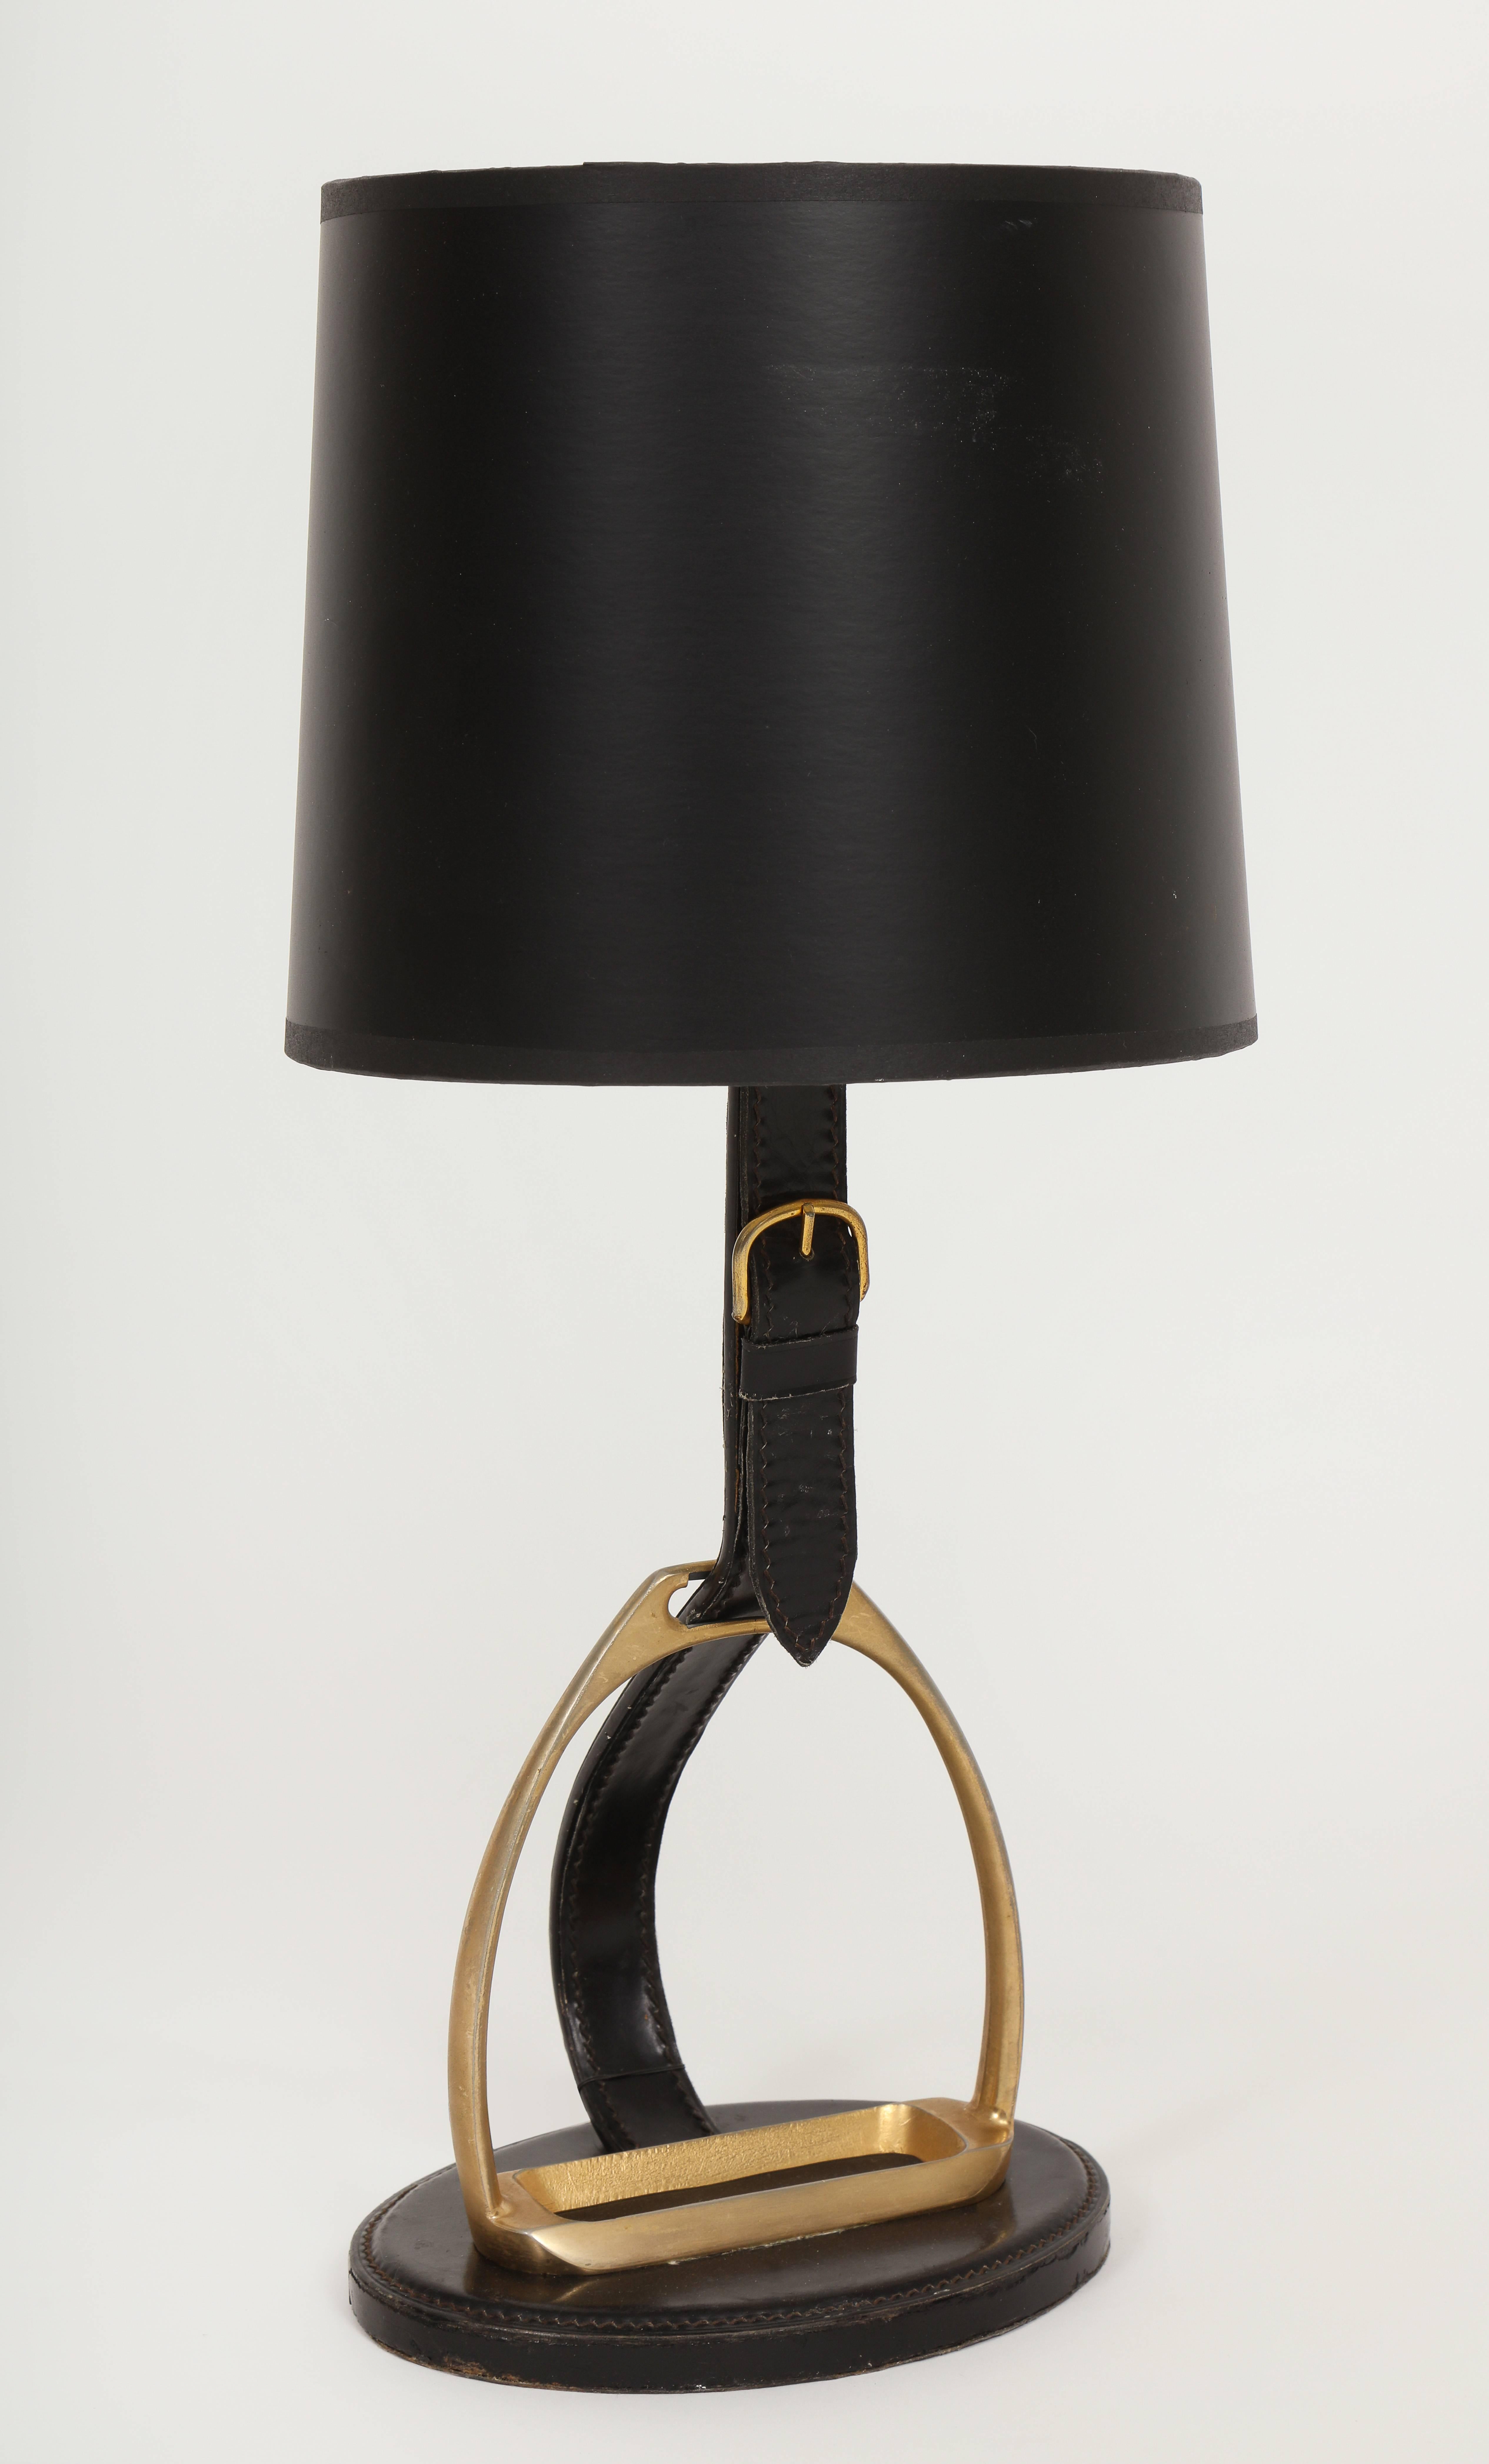 Longchamp Equestrian Mid-Century brass leather horse buckle lamp, 1950s, France.

Measures: 20.25 height,
12 inches wide,
9 inches diameter.